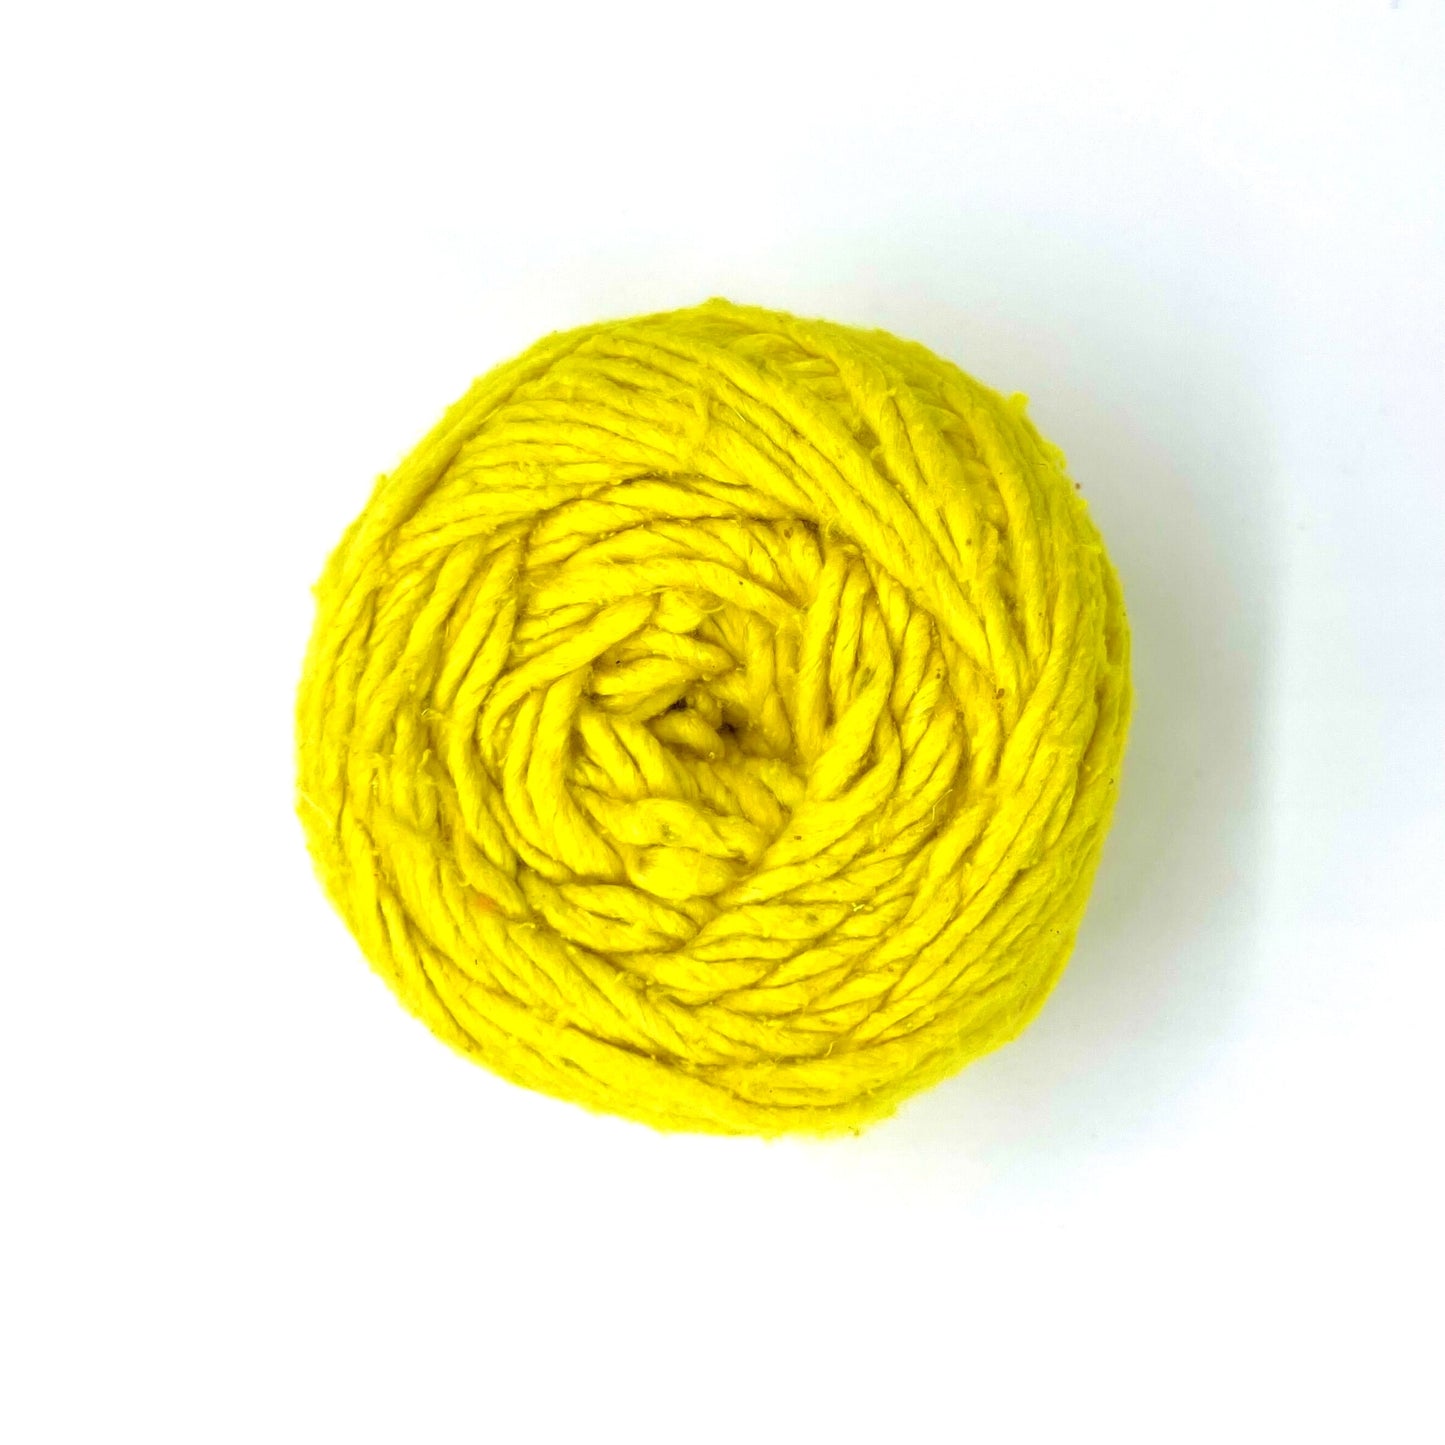 A skein on yellow worsted weight silk yarn called "Illuminating" on a white background.